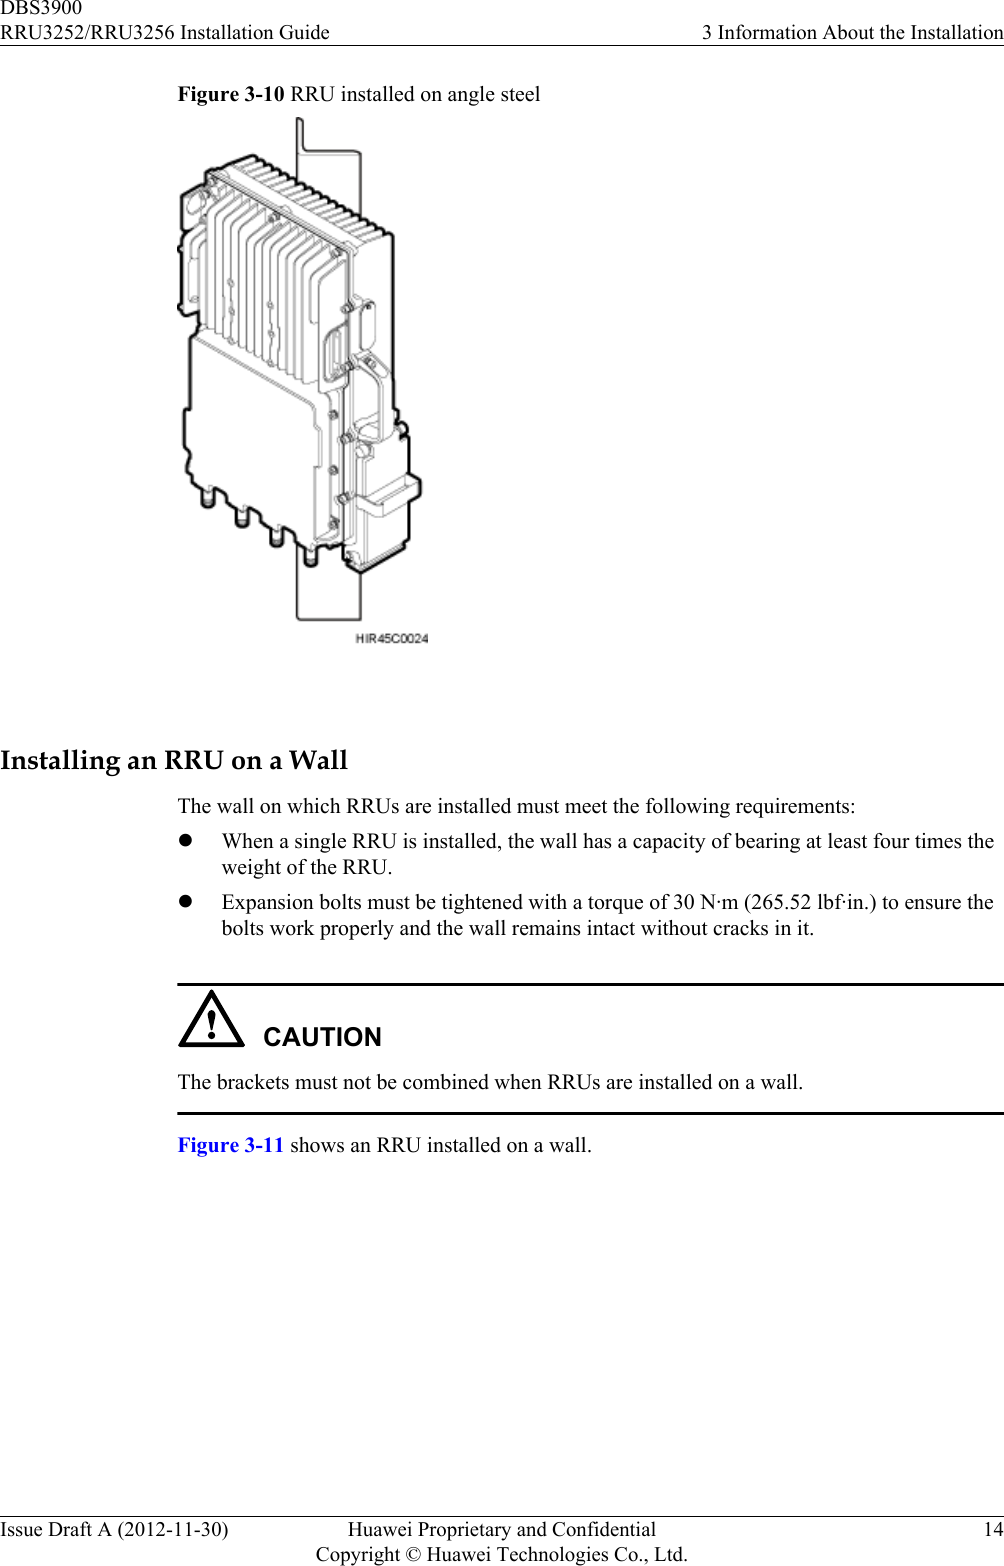 Figure 3-10 RRU installed on angle steel Installing an RRU on a WallThe wall on which RRUs are installed must meet the following requirements:lWhen a single RRU is installed, the wall has a capacity of bearing at least four times theweight of the RRU.lExpansion bolts must be tightened with a torque of 30 N·m (265.52 lbf·in.) to ensure thebolts work properly and the wall remains intact without cracks in it.CAUTIONThe brackets must not be combined when RRUs are installed on a wall.Figure 3-11 shows an RRU installed on a wall.DBS3900RRU3252/RRU3256 Installation Guide 3 Information About the InstallationIssue Draft A (2012-11-30) Huawei Proprietary and ConfidentialCopyright © Huawei Technologies Co., Ltd.14